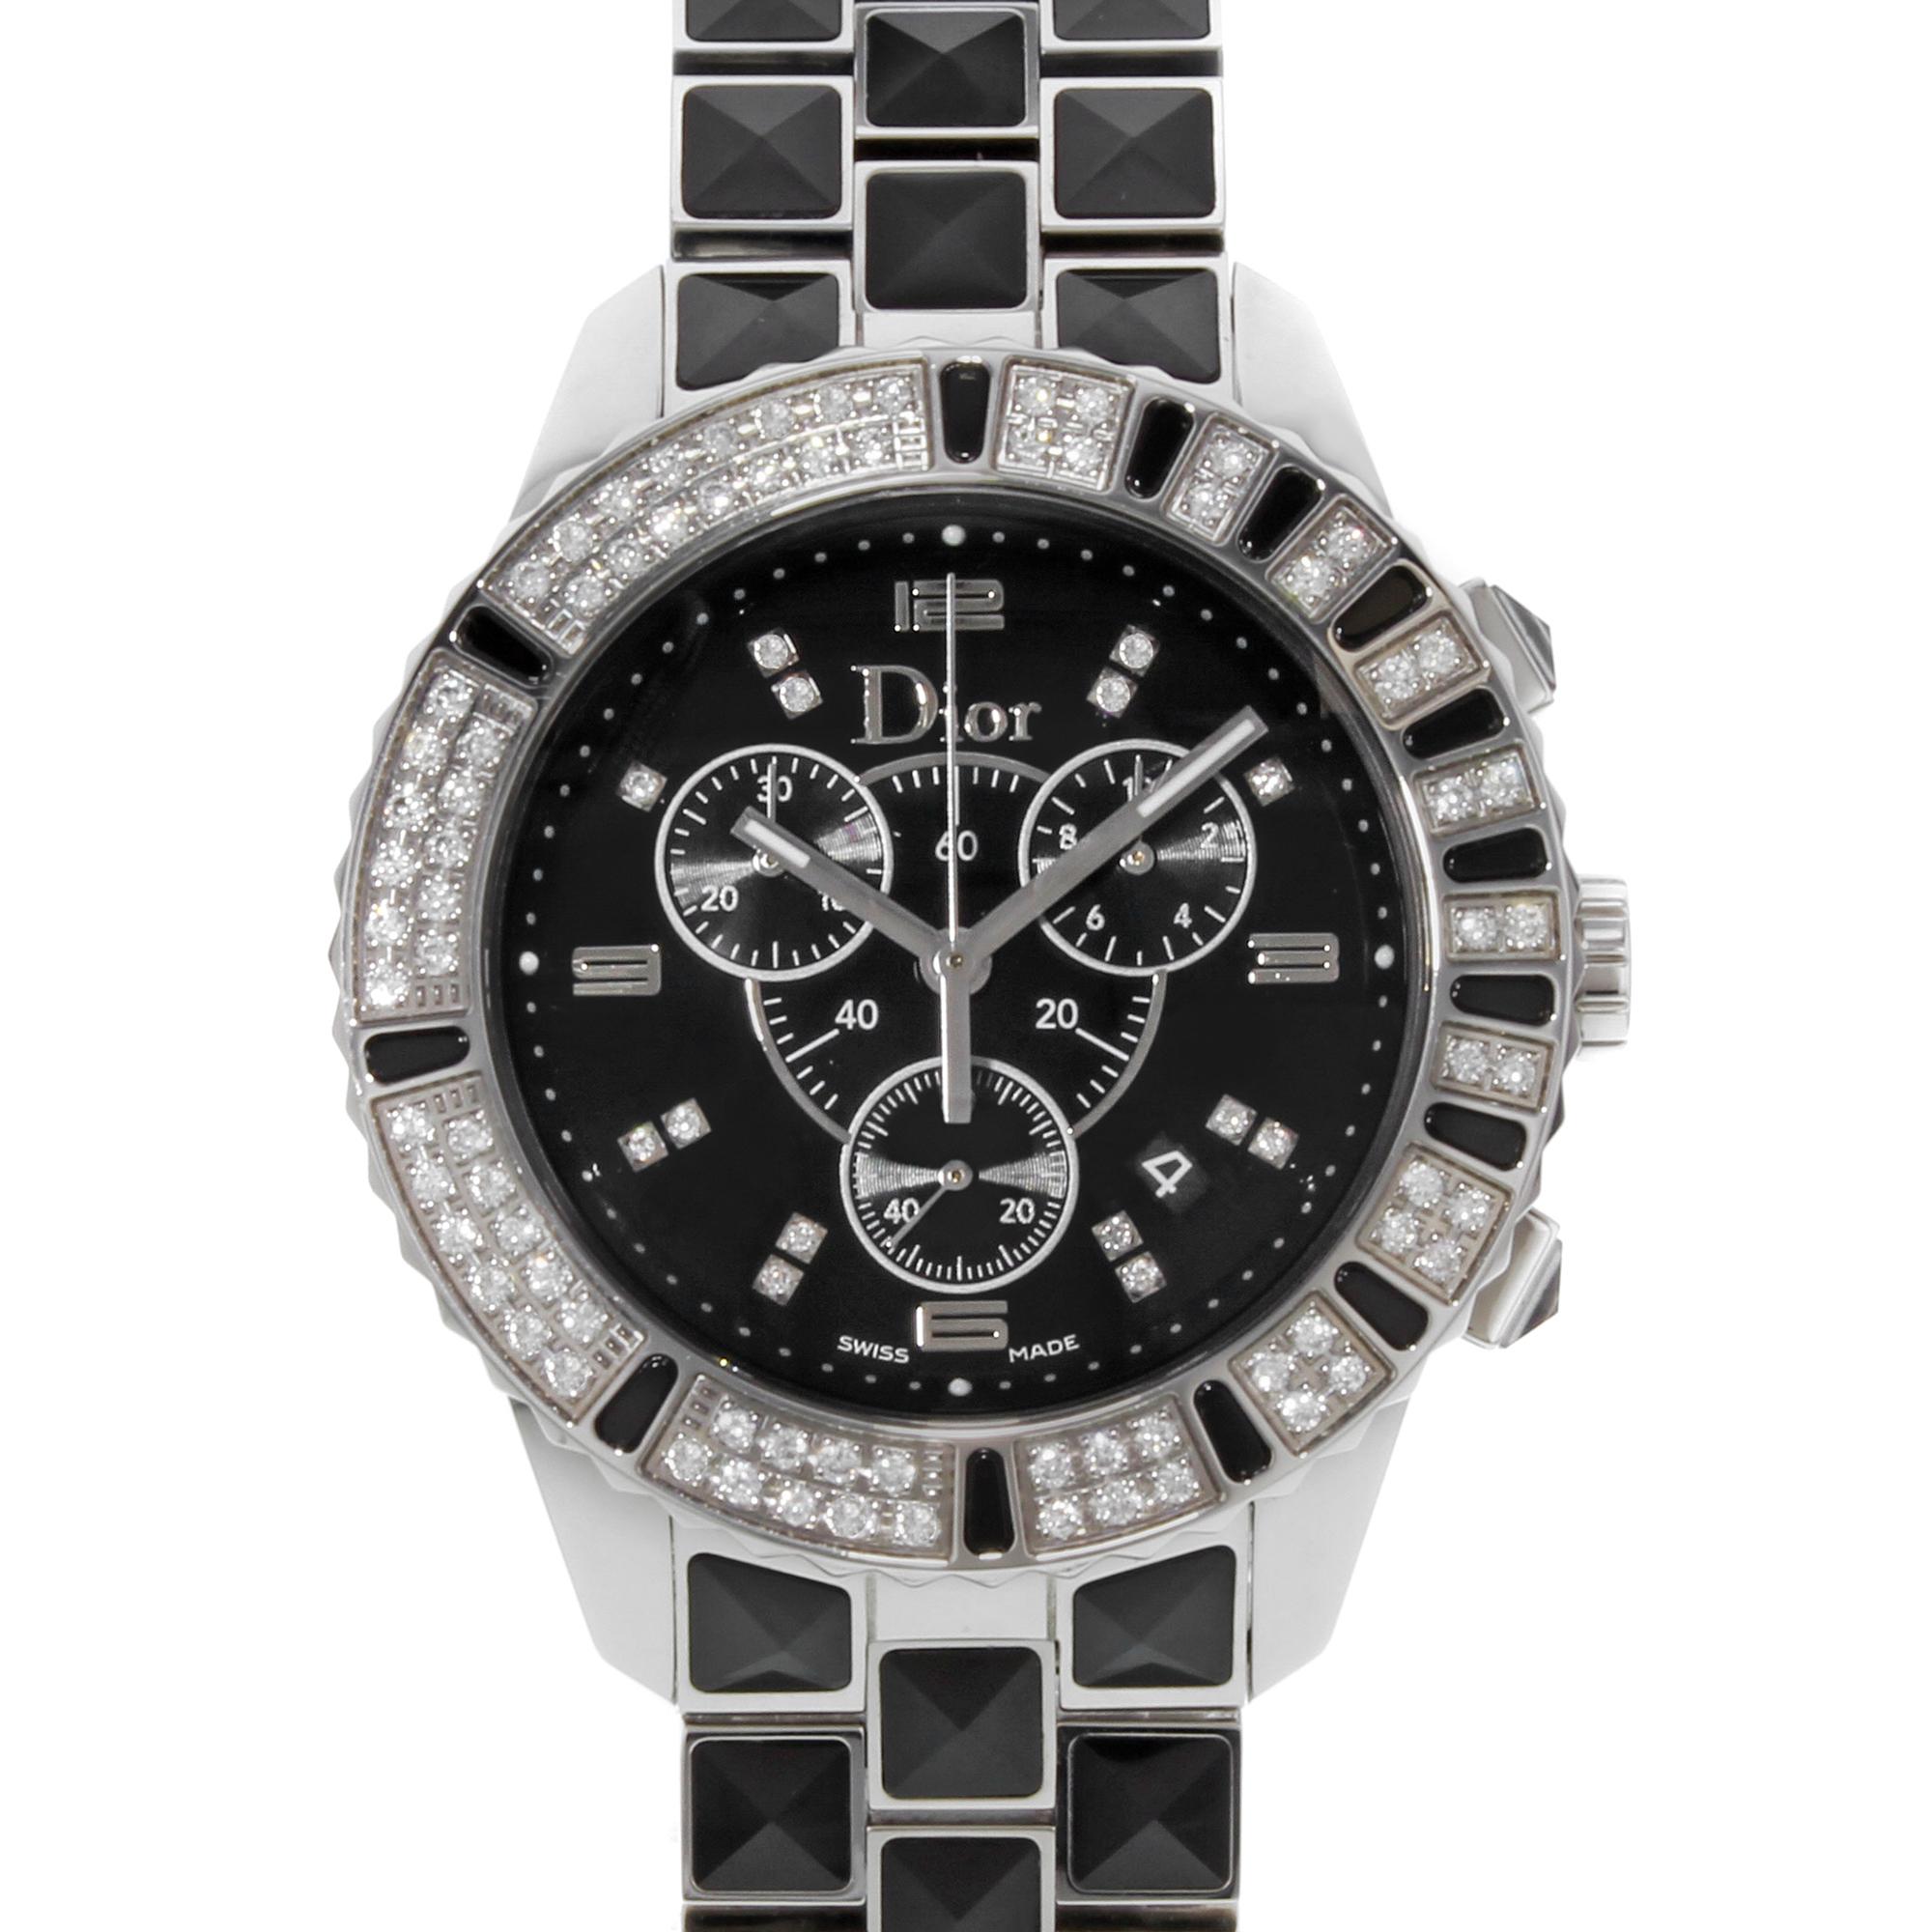 This display model Christian Dior Christal CD11431CM001 is a beautiful Unisex timepiece that is powered by a quartz movement which is cased in a stainless steel case. It has a round shape face, chronograph, date, diamonds, small seconds subdial